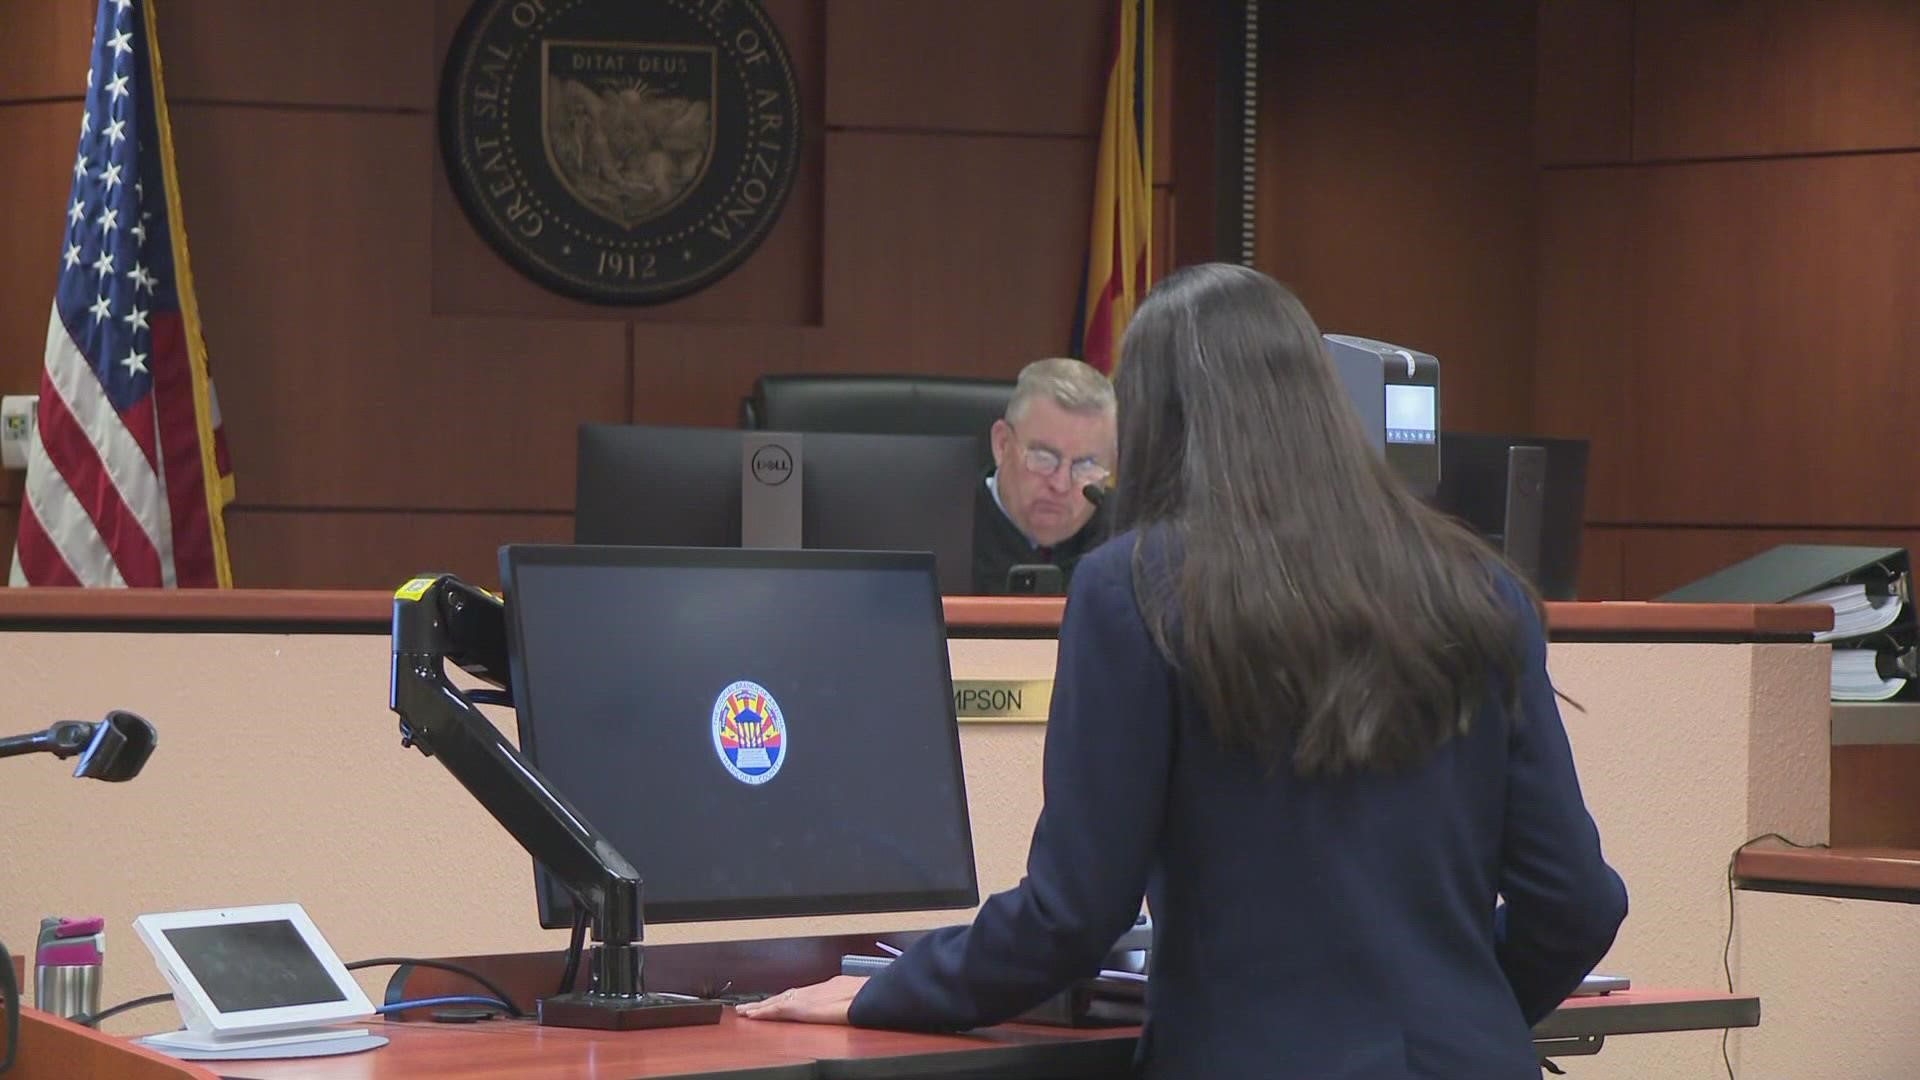 Arizona court ordered the confirmation of Katie Hobbs as Arizona governor-elect. Lake says she will appeal the ruling.